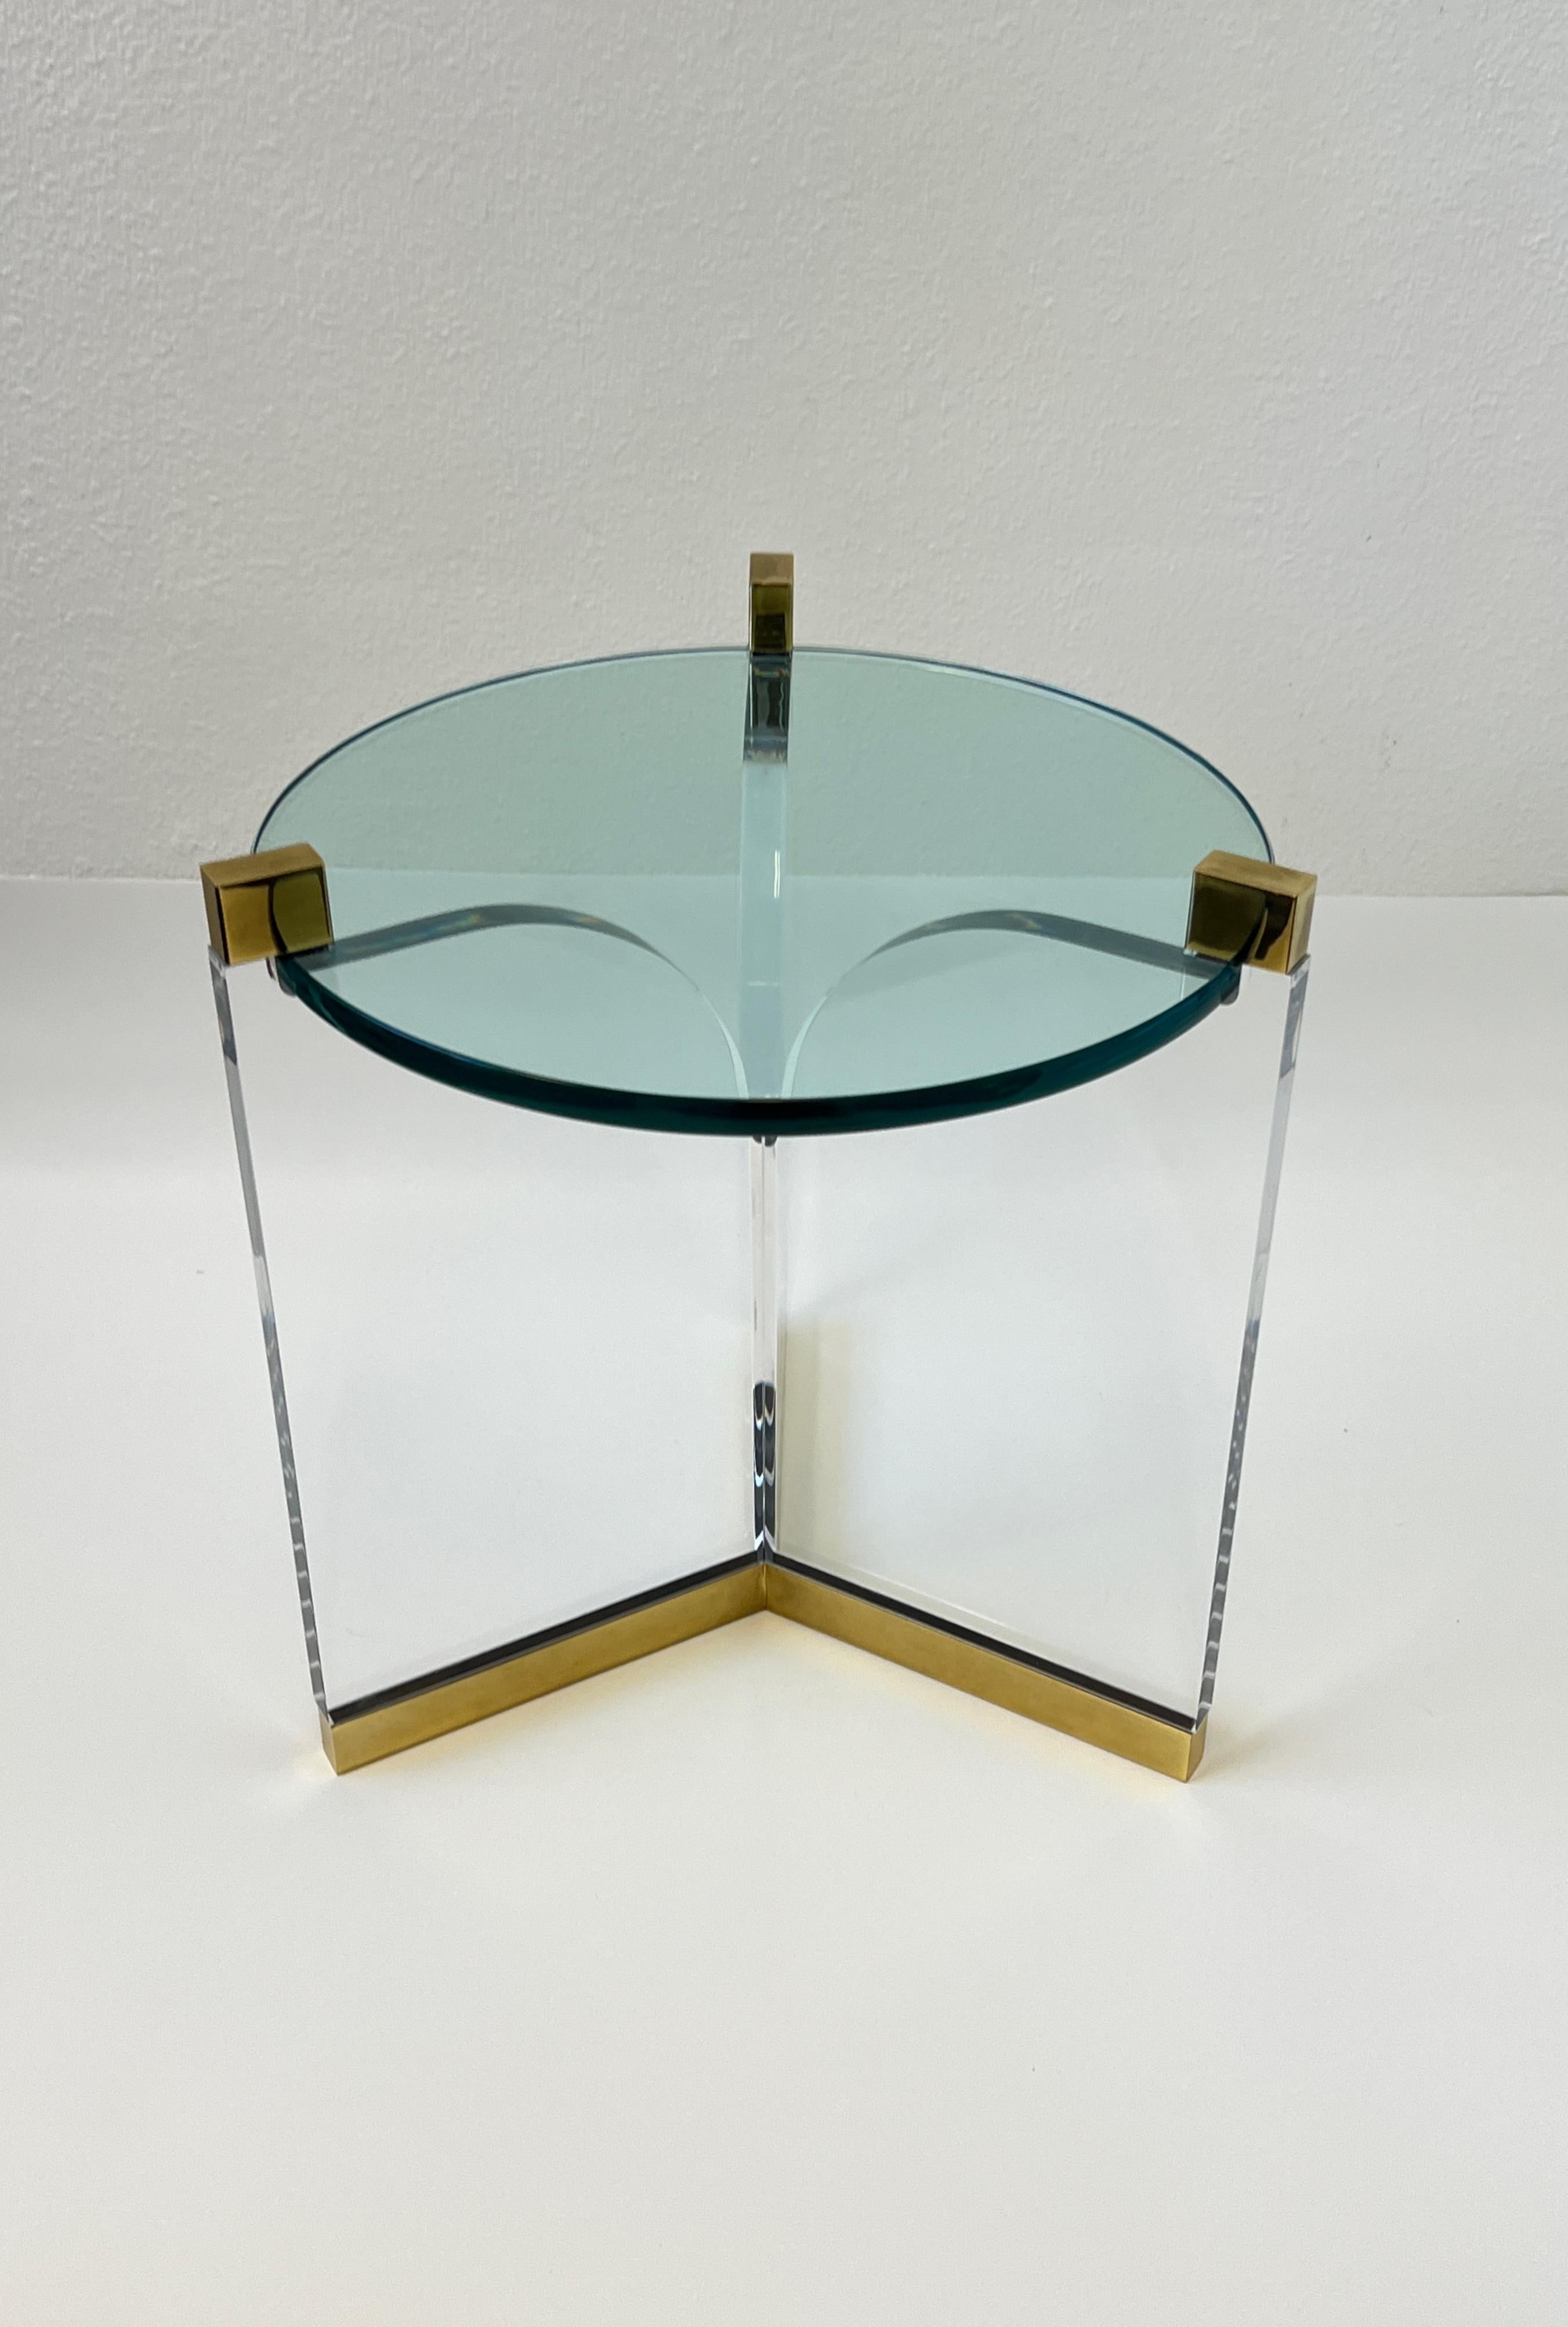 Glamorous 1970’s clear lucite and polish brass with a 3/4” thick glass top side table. 
Designed by renowned American designer Charles Hollis Jones. 
In beautiful vintage condition with minor wear consistent with age. 
Measurements: 21” wide, 21”